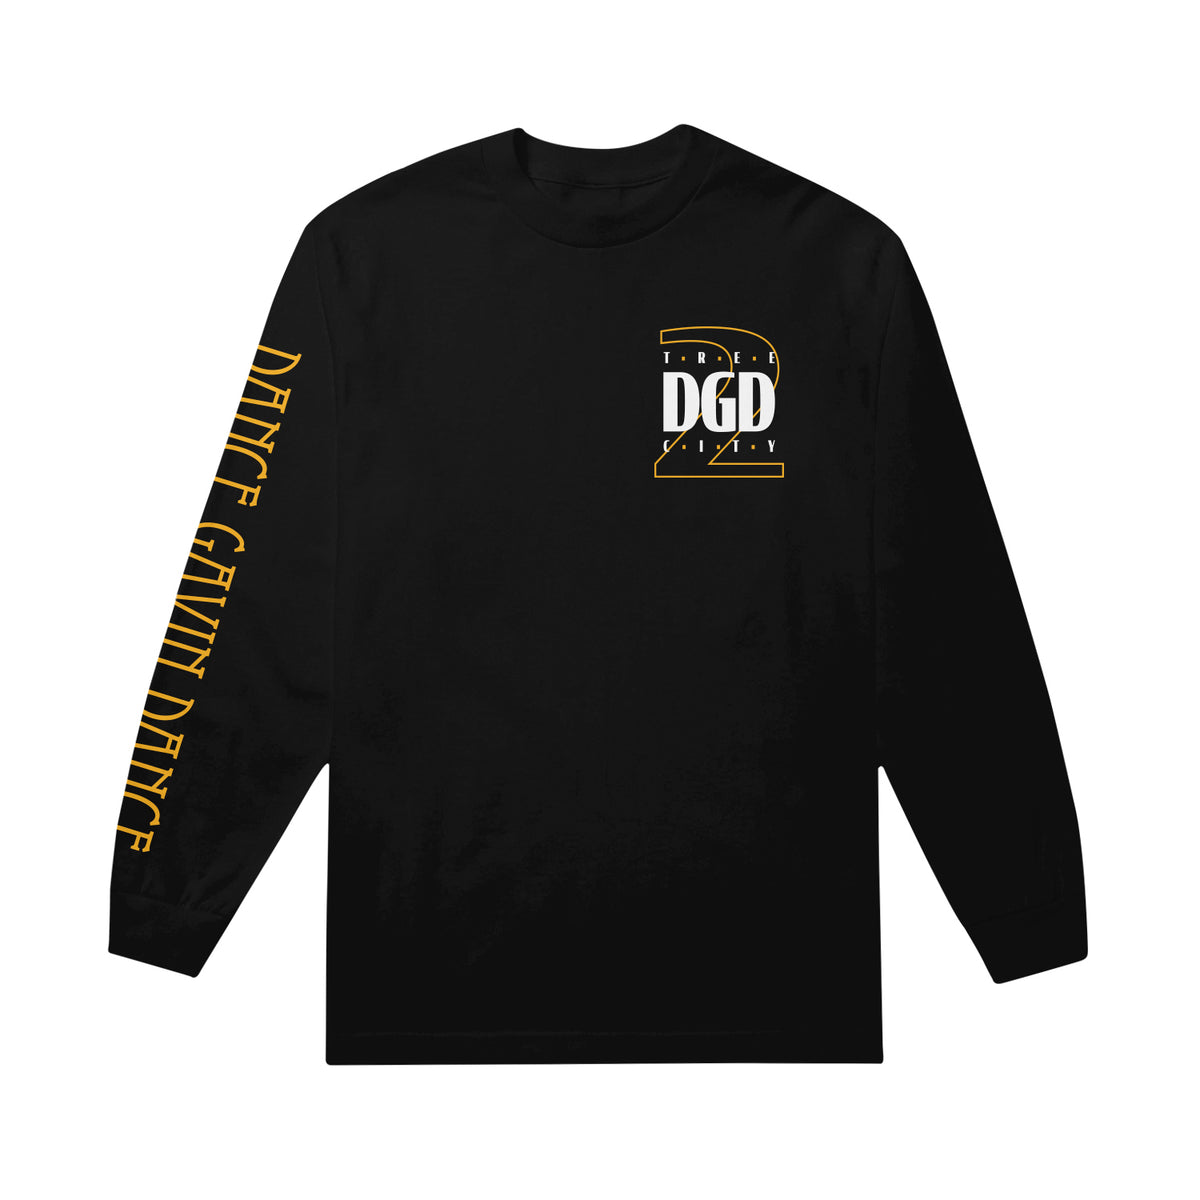 black long sleeve on white background front of shirt with yellow print down full right sleeve that says dance gavin dance and left chest print that says D G D in white with yellow 2 around it